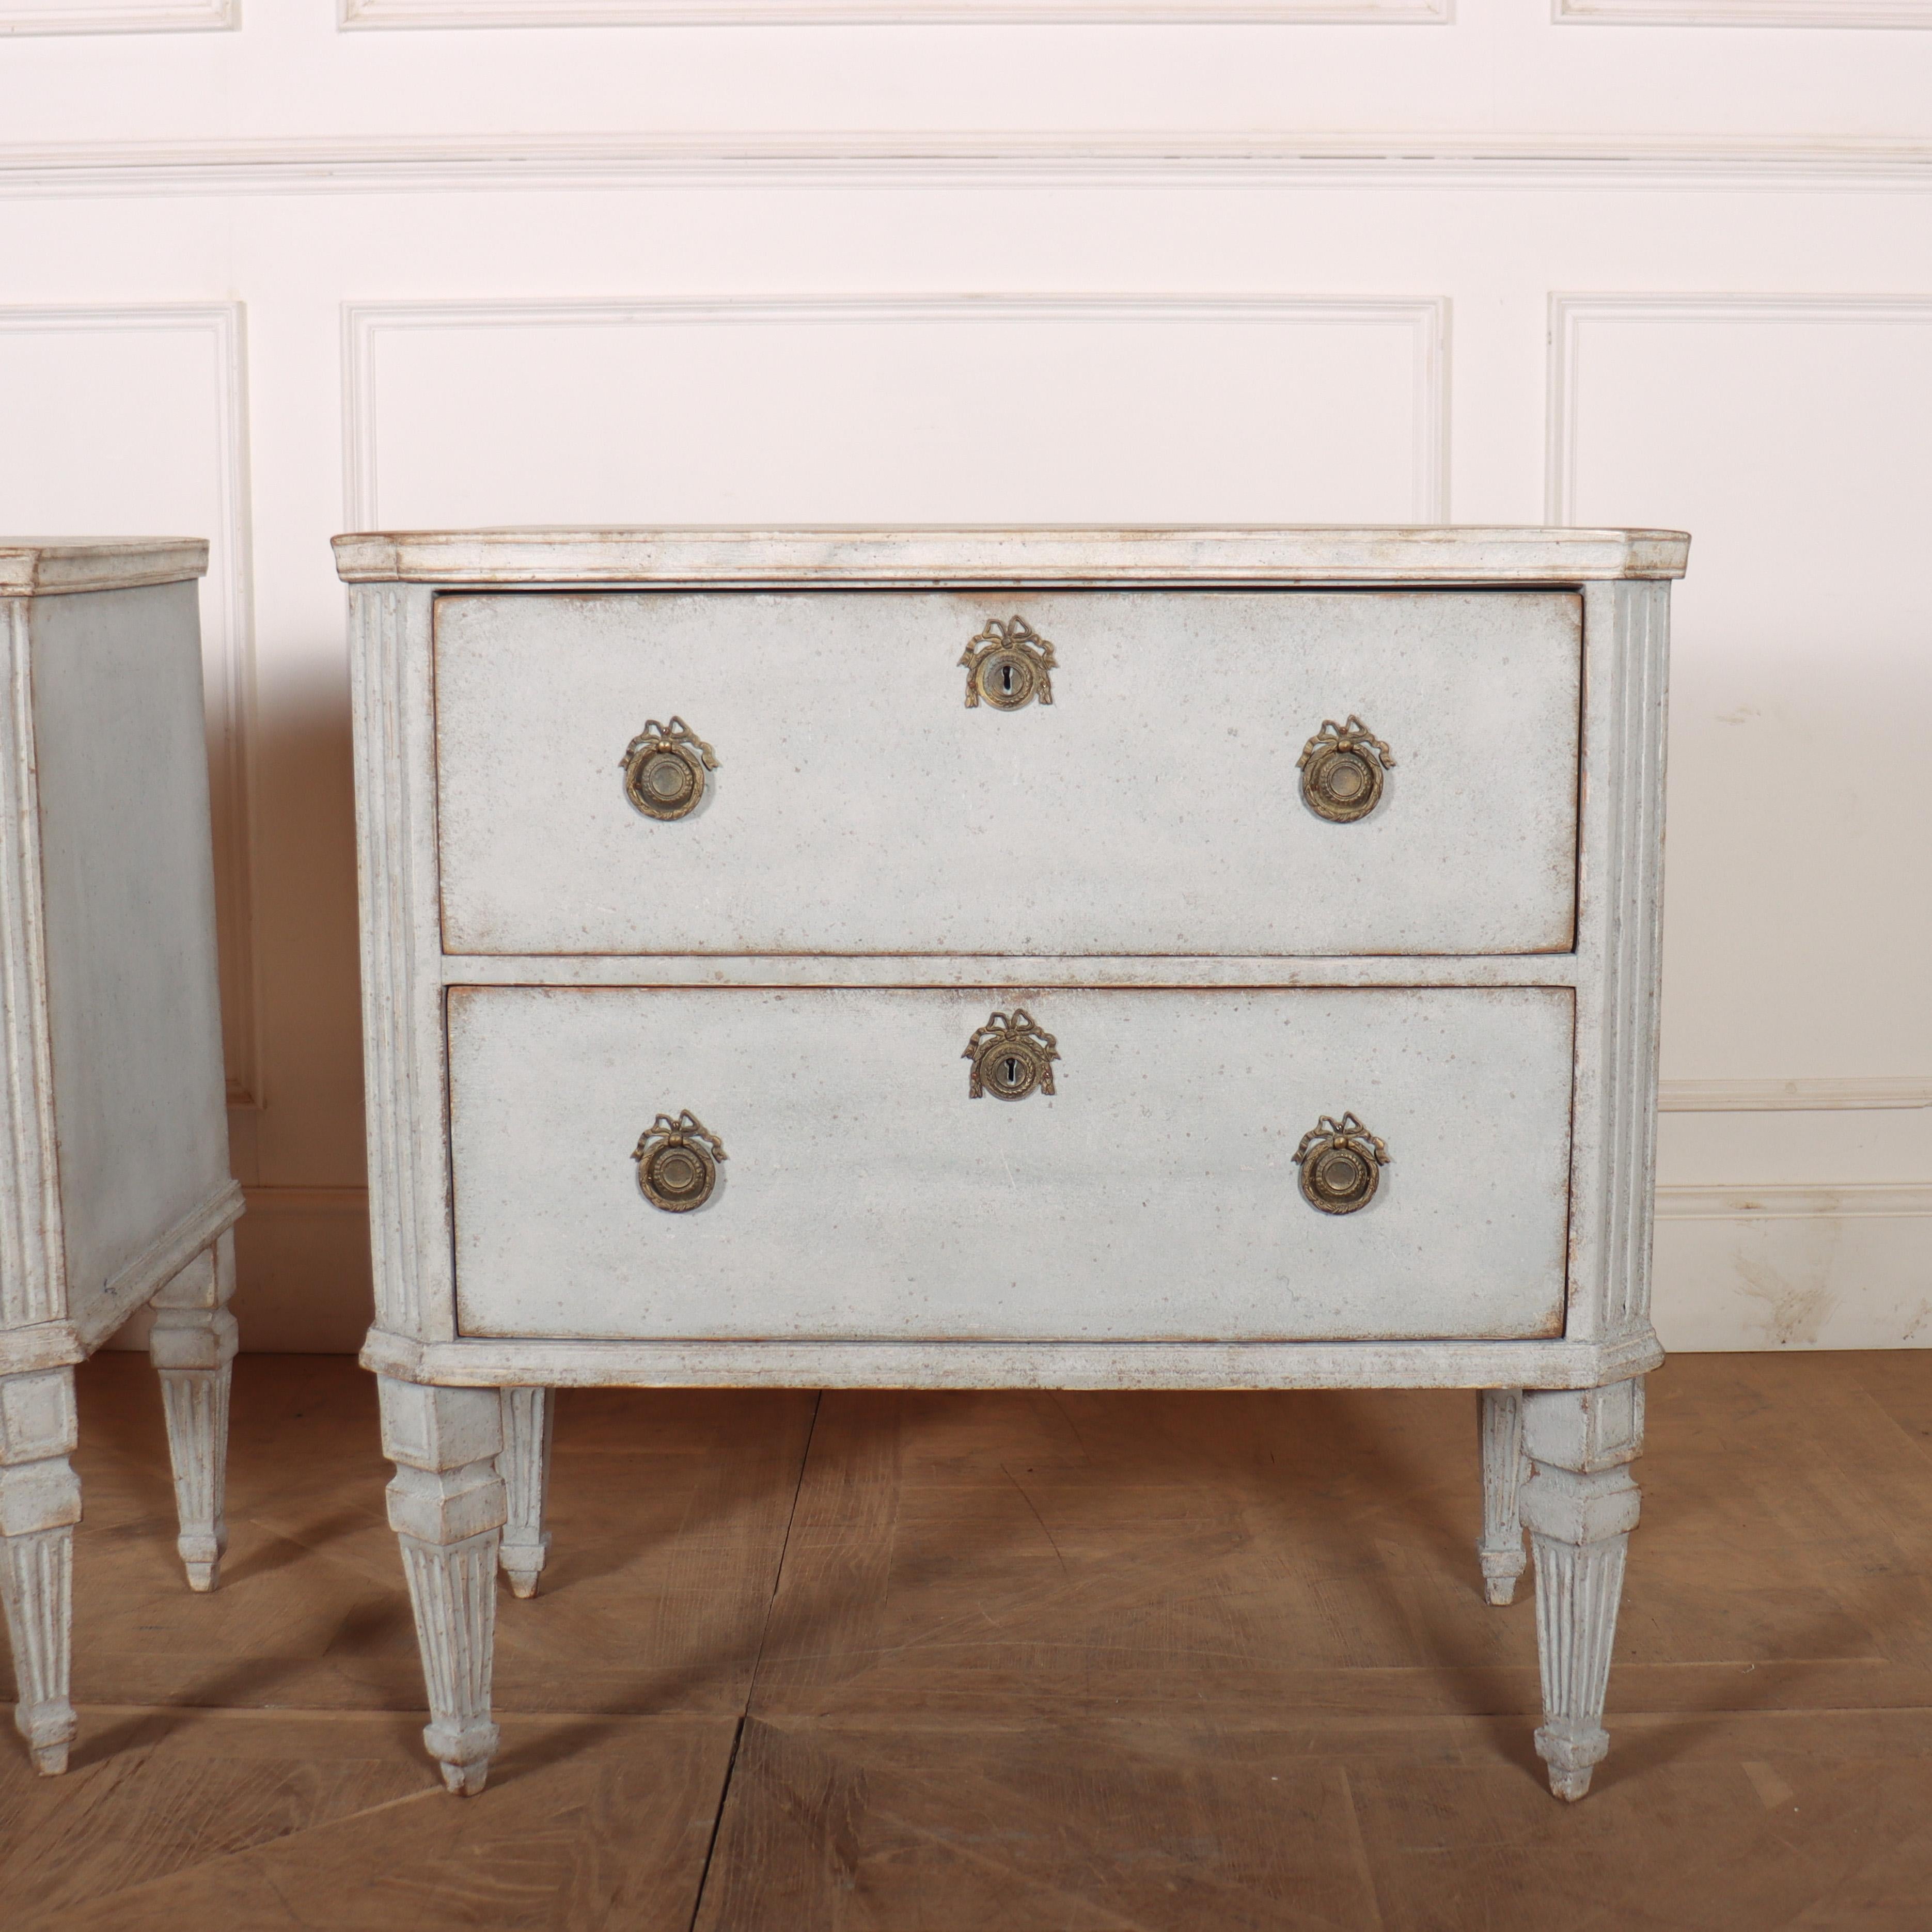 Lovely pair of early 19th C Swedish painted commodes with faux marble tops. 1820.

Reference: 8386

Dimensions
32.5 inches (83 cms) Wide
18.5 inches (47 cms) Deep
32.5 inches (83 cms) High